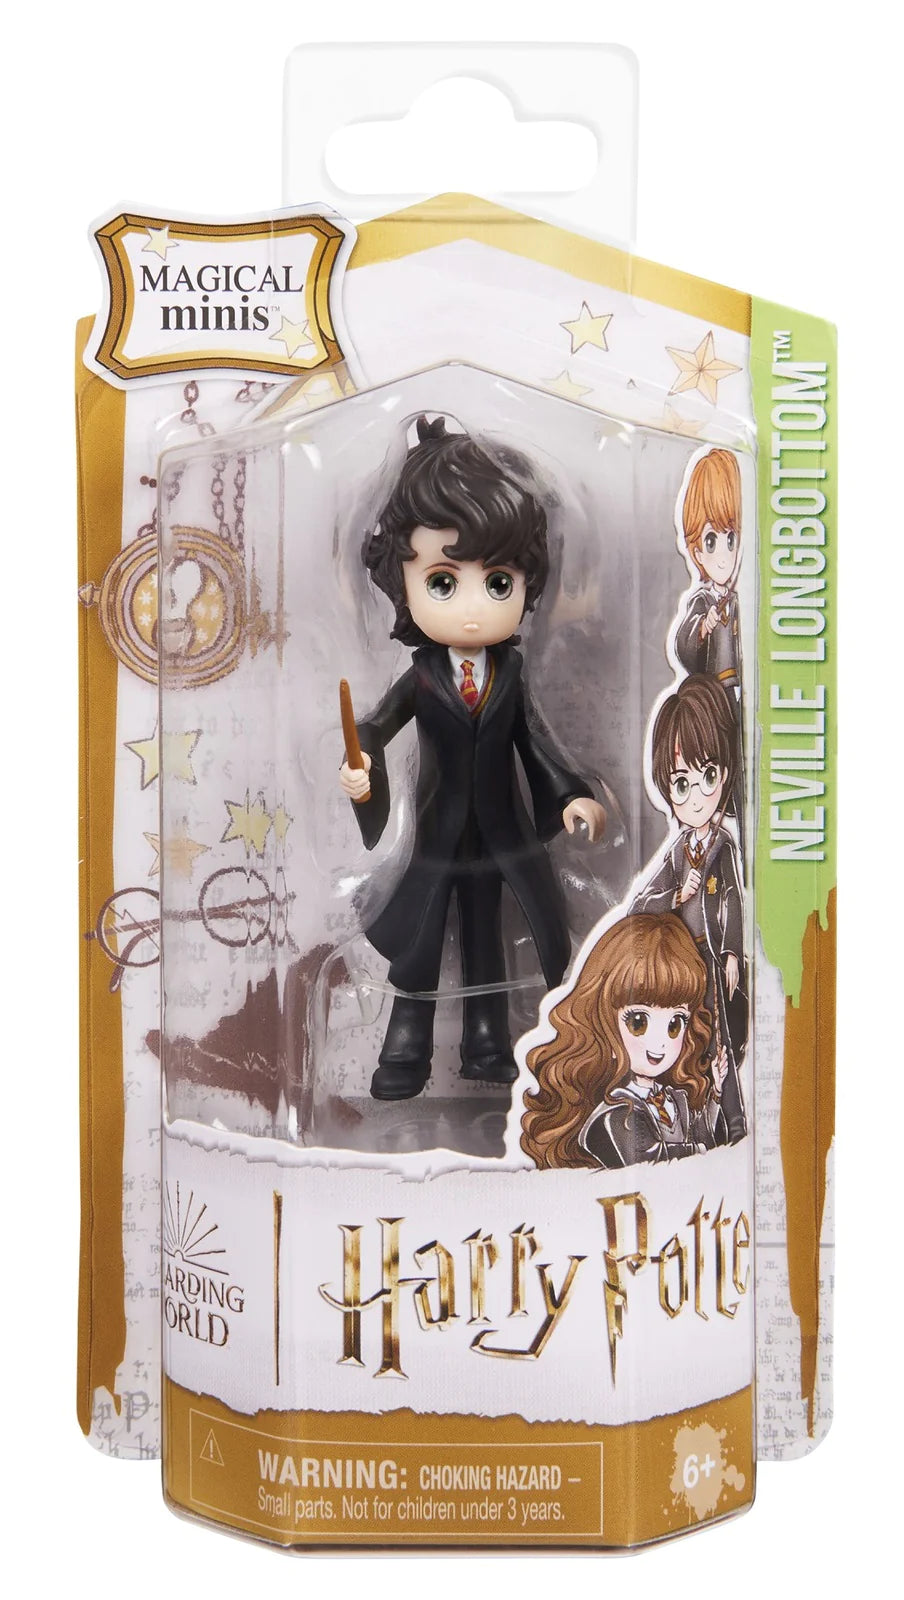 Wizarding World Harry Potter, Magical Minis Collectible 3-inch Neville Longbottom Figure, Kids Toys for Ages 6 and up